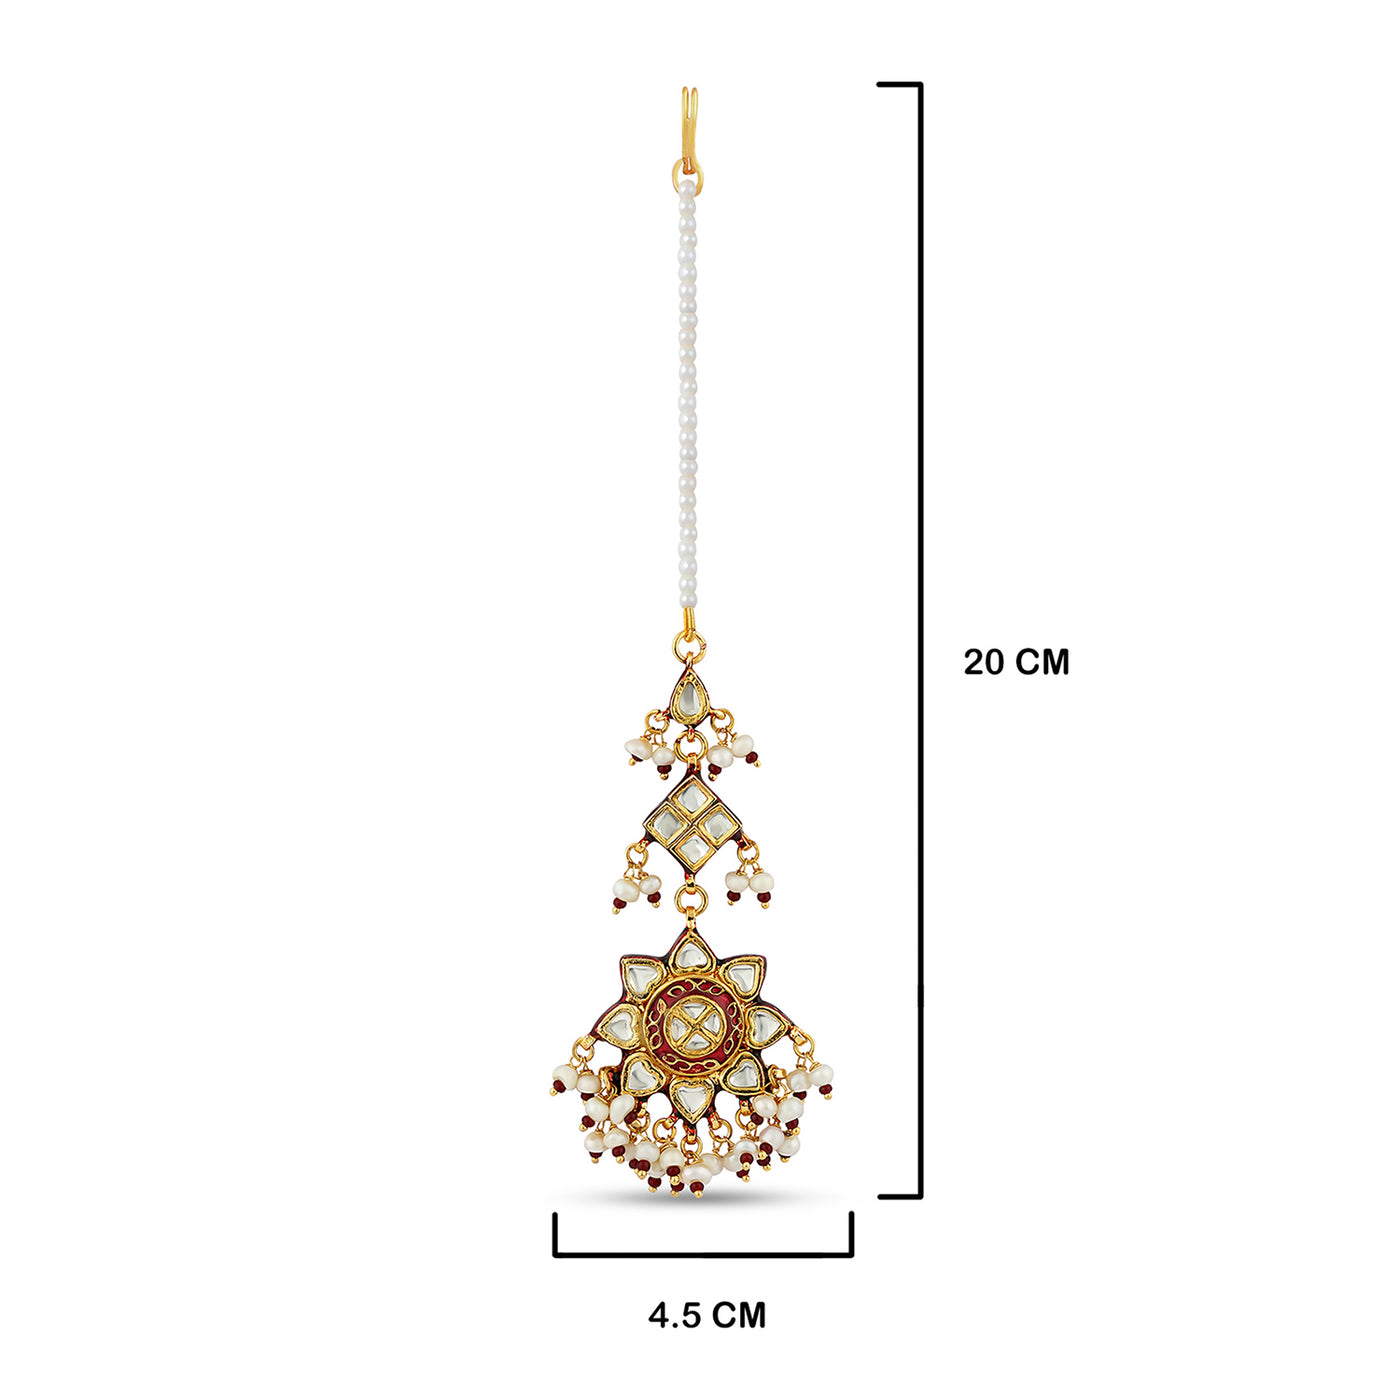 Red Centred Sun Shaped Kundan Maang Tikka with Measurements in cm. 20 by 4.5cm.